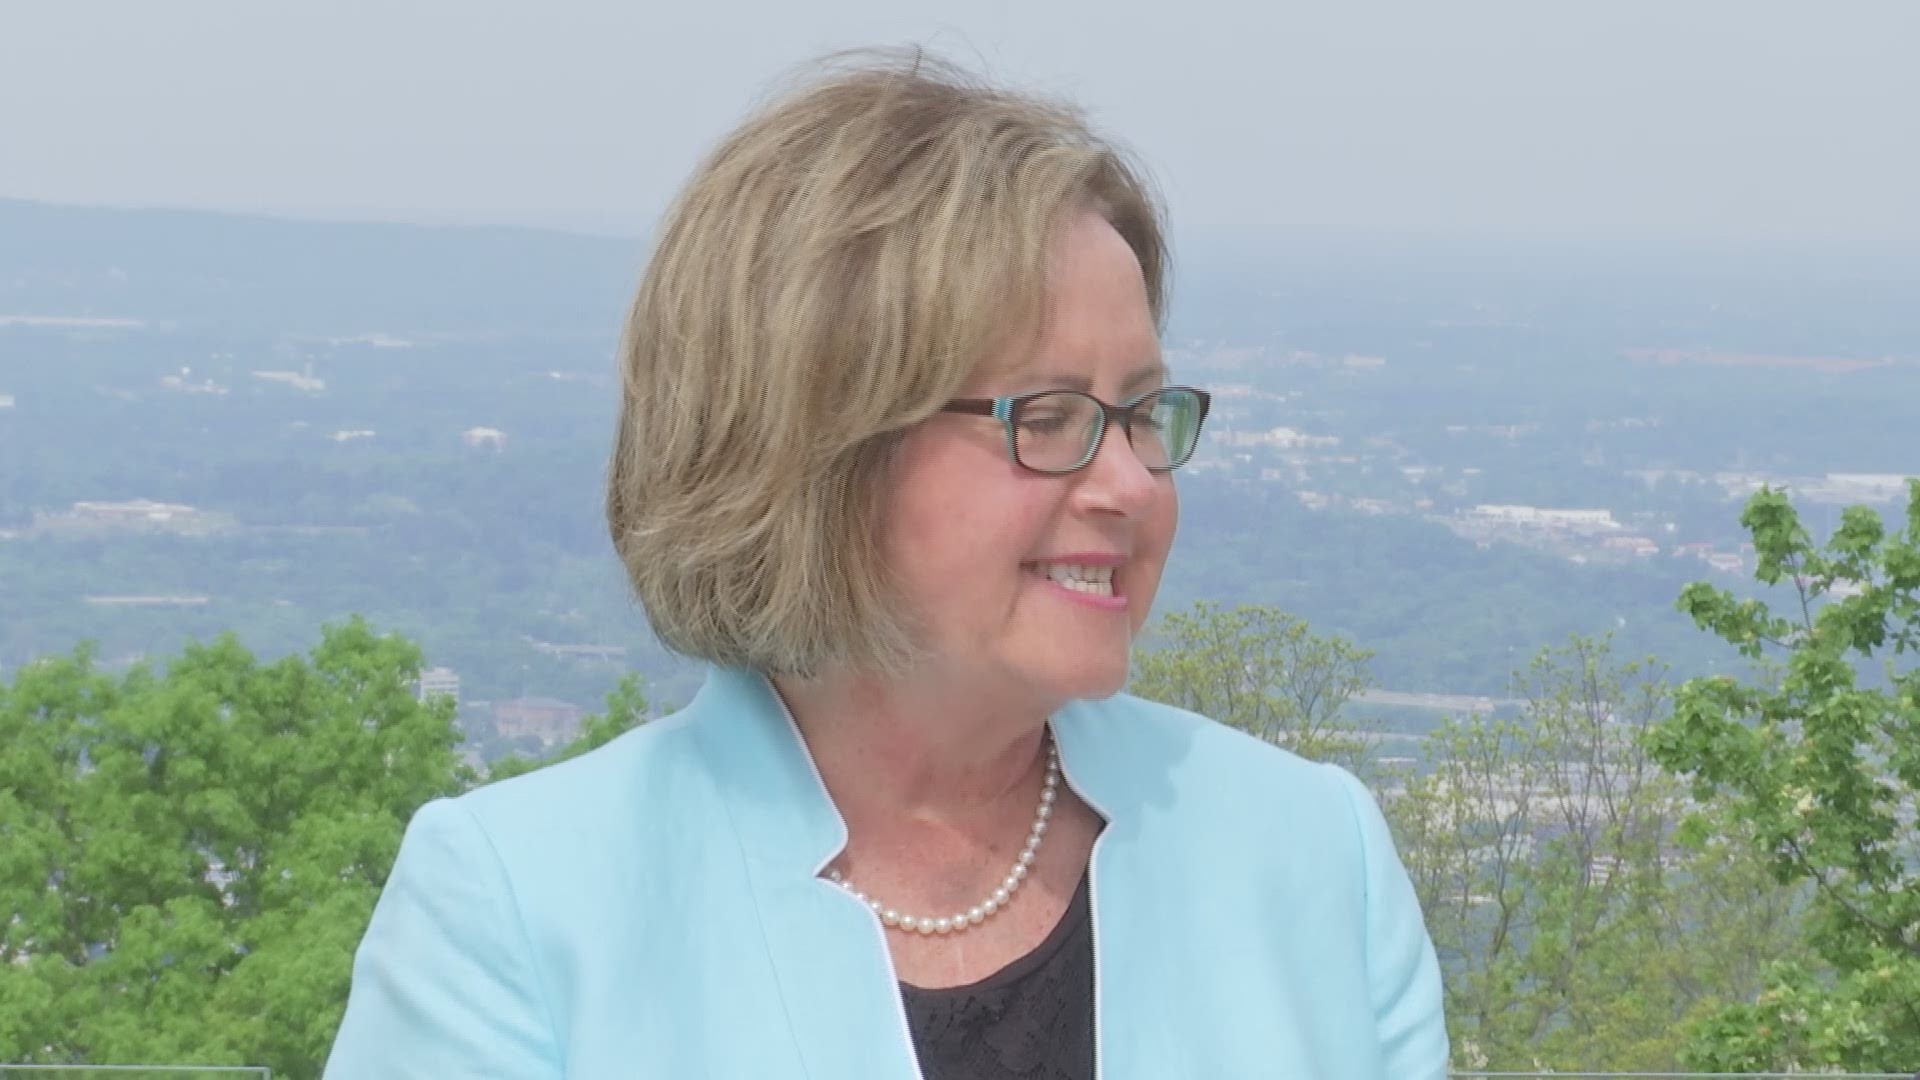 The Huntsville/Madison County CVB is focusing on the role travel will play in recovering from the pandemic during Huntsville Attractions Week.